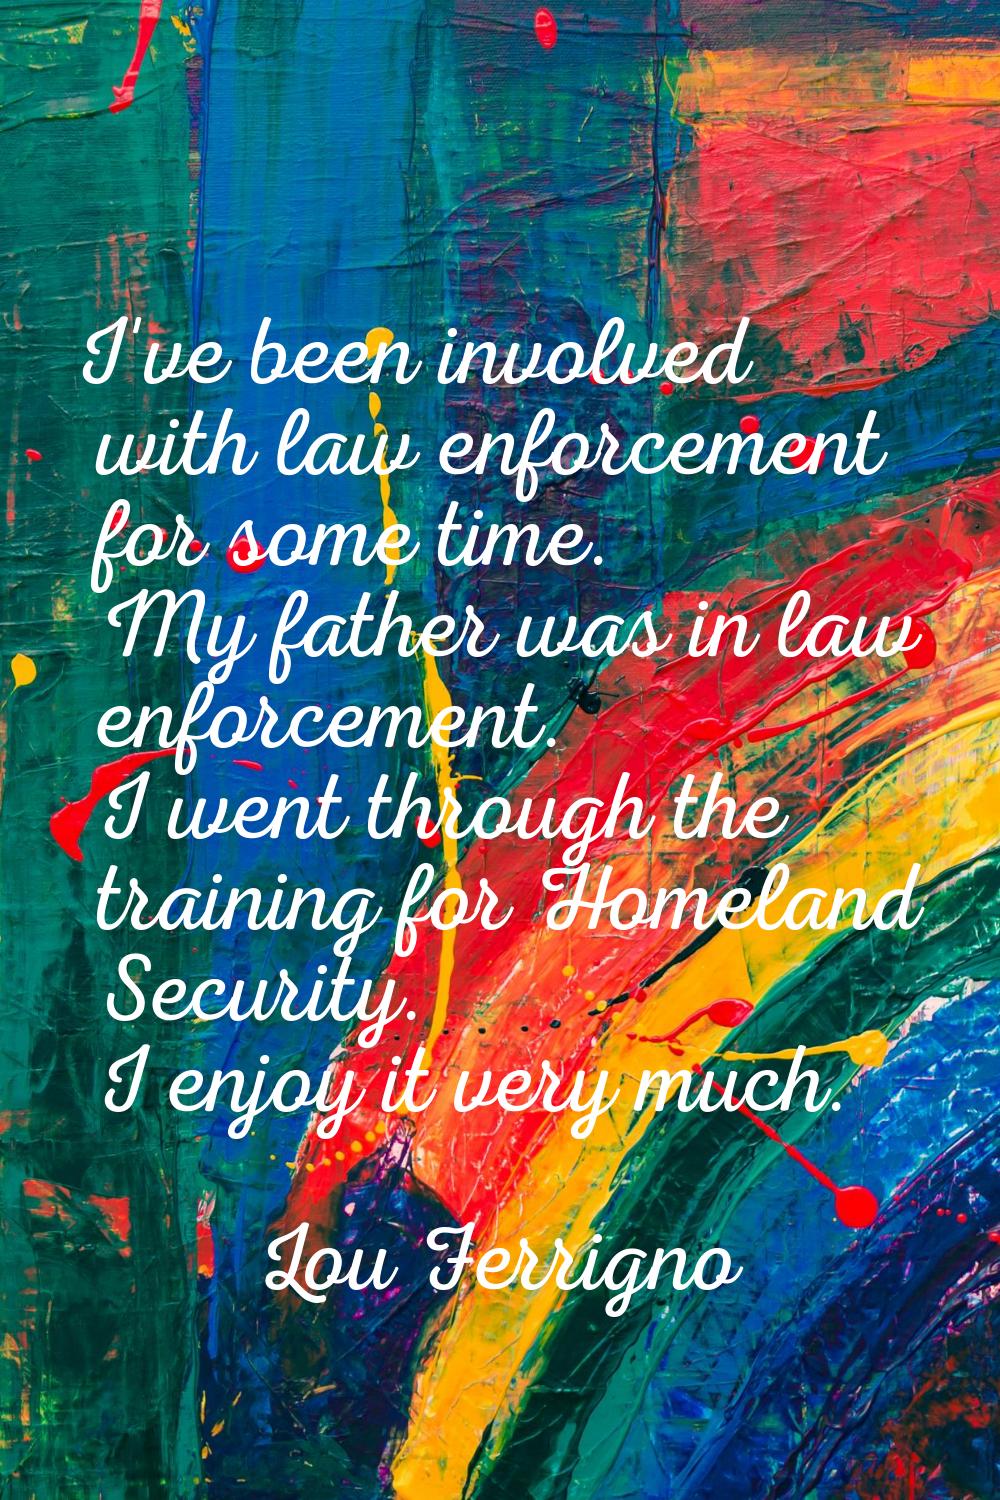 I've been involved with law enforcement for some time. My father was in law enforcement. I went thr